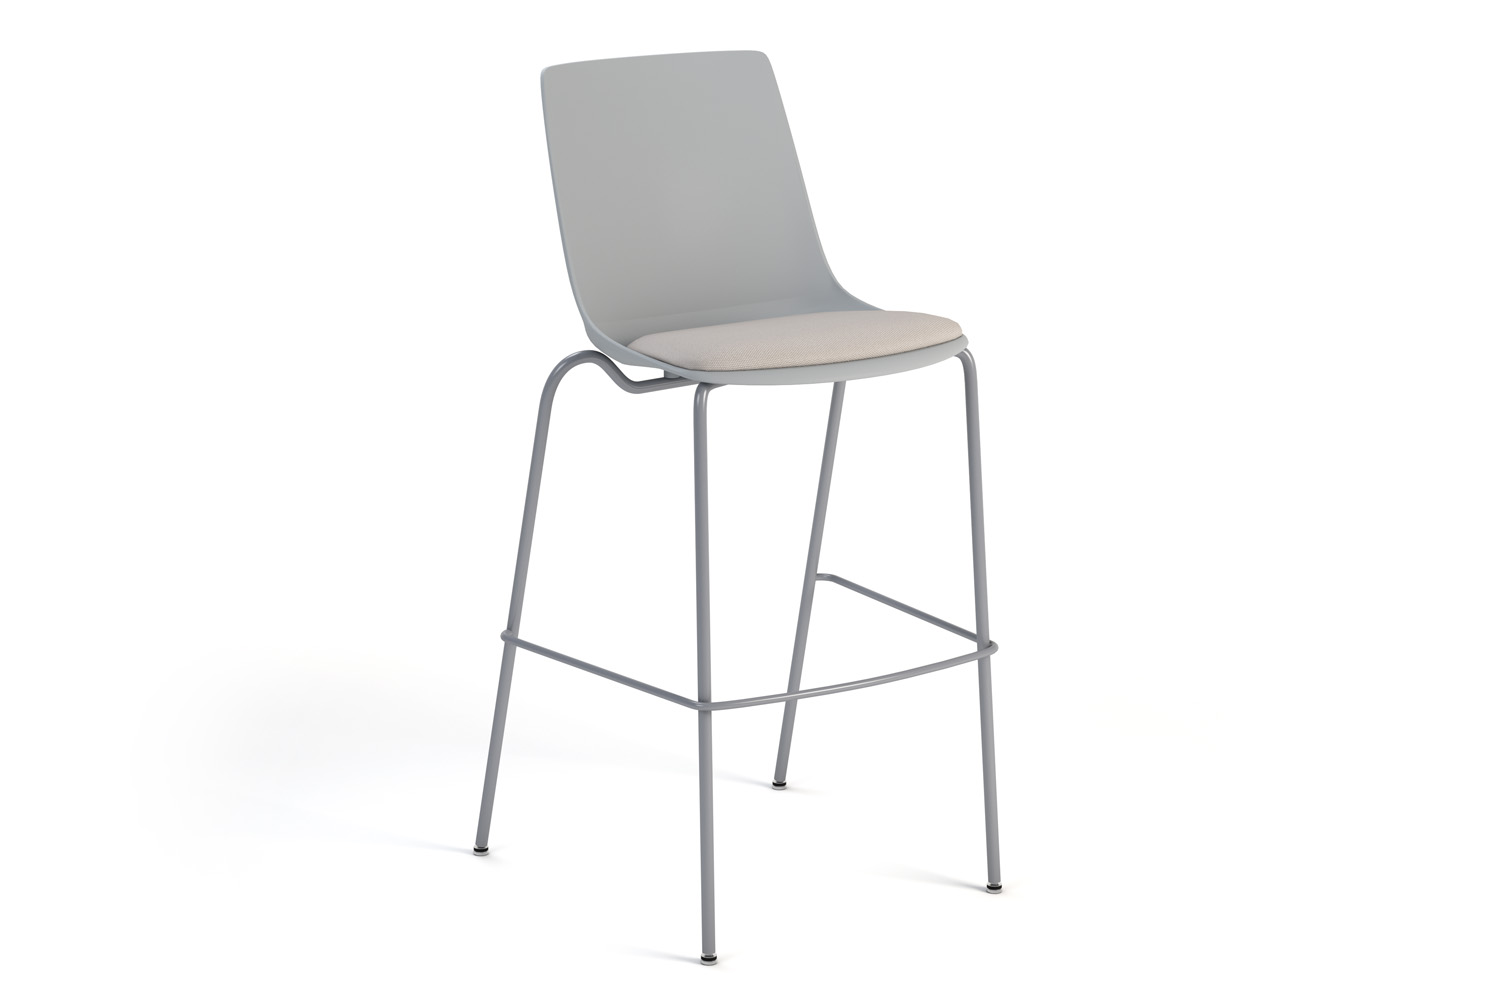 Kayden Stool with Upholstered Seat Insert